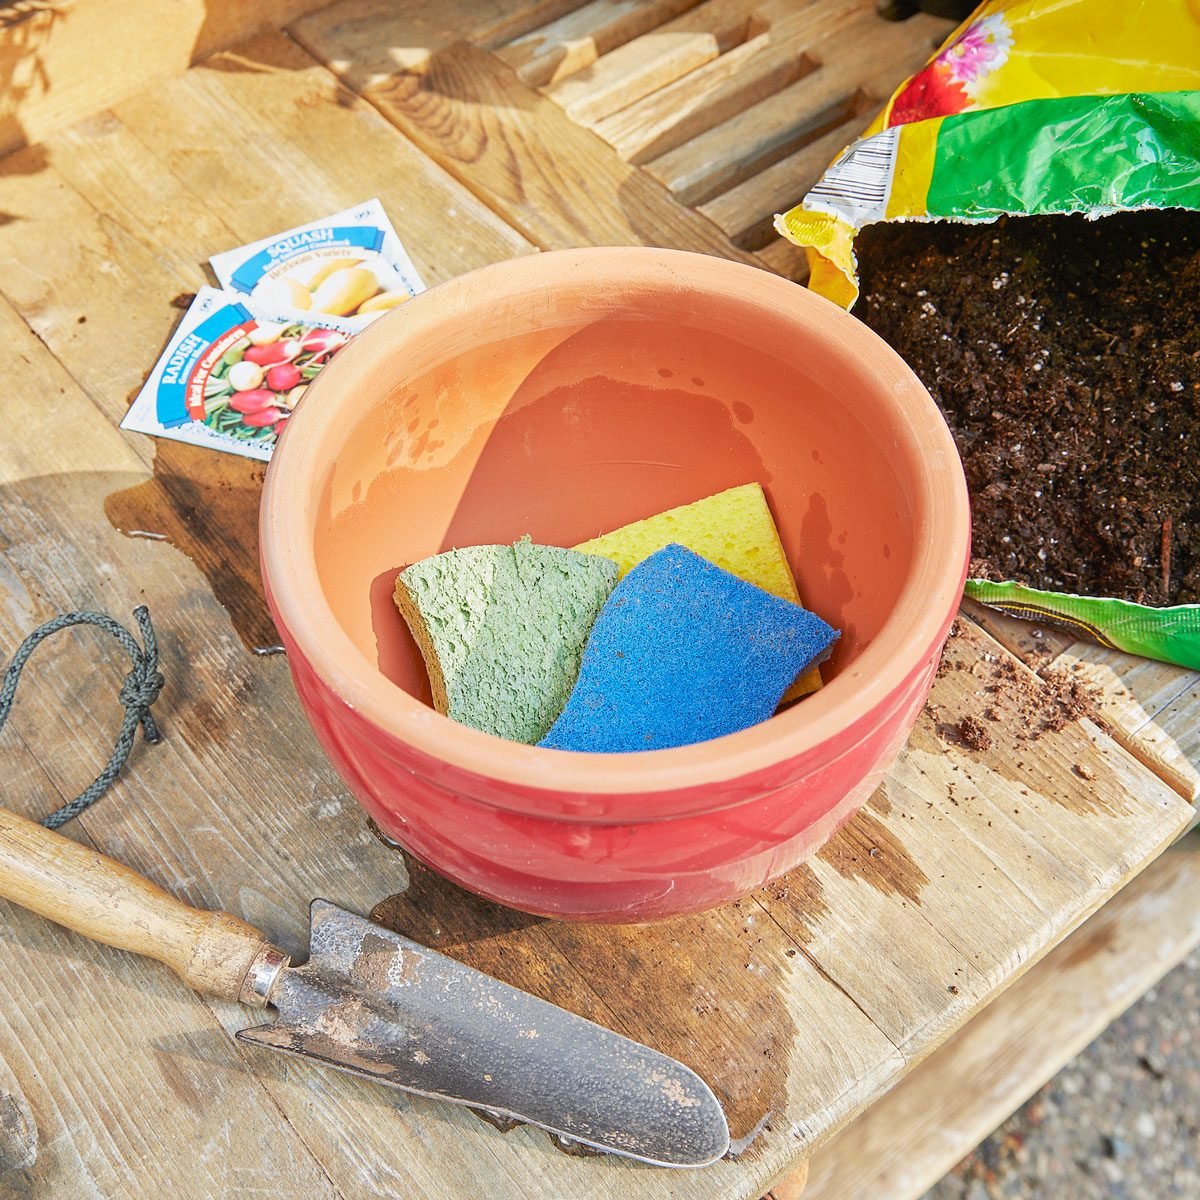 three spongs at the base of a terra cotta pot near potting soil, seed packets, and gardening shovel